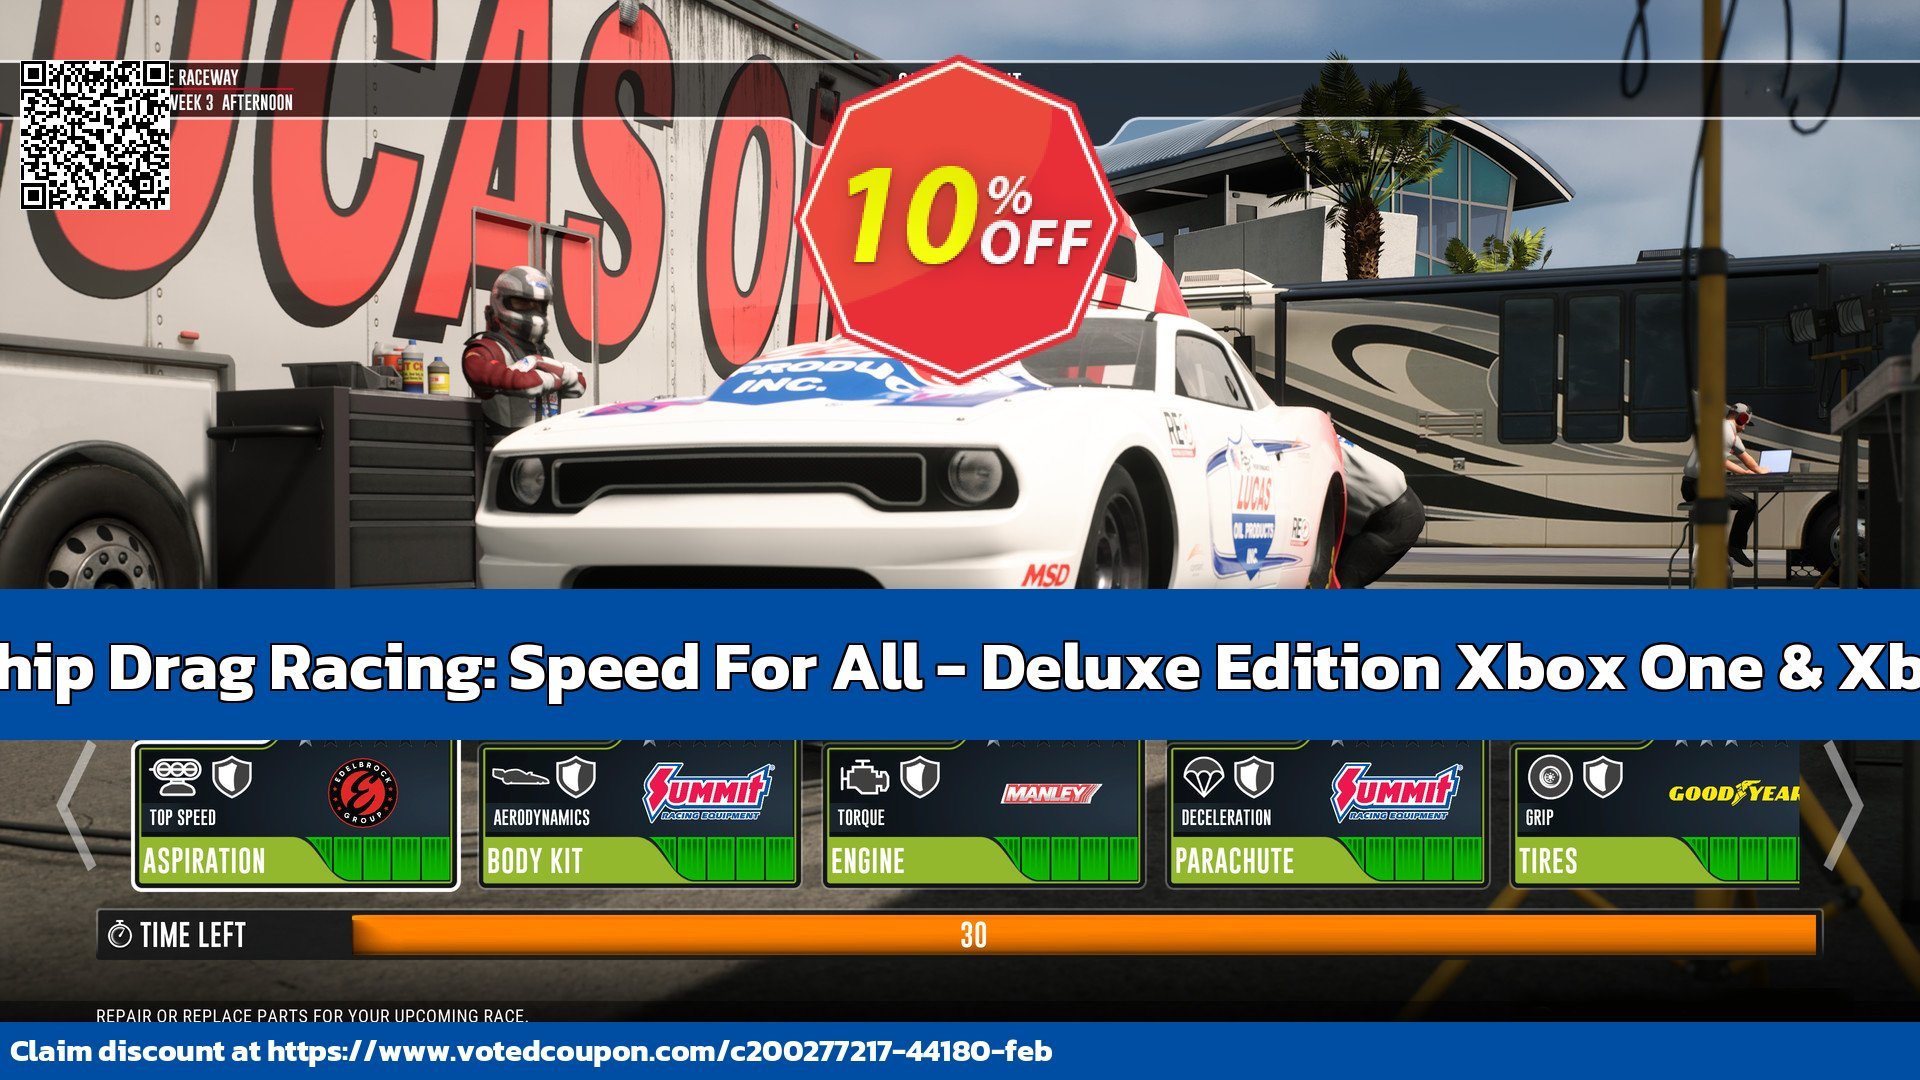 NHRA Championship Drag Racing: Speed For All - Deluxe Edition Xbox One & Xbox Series X|S, US  voted-on promotion codes